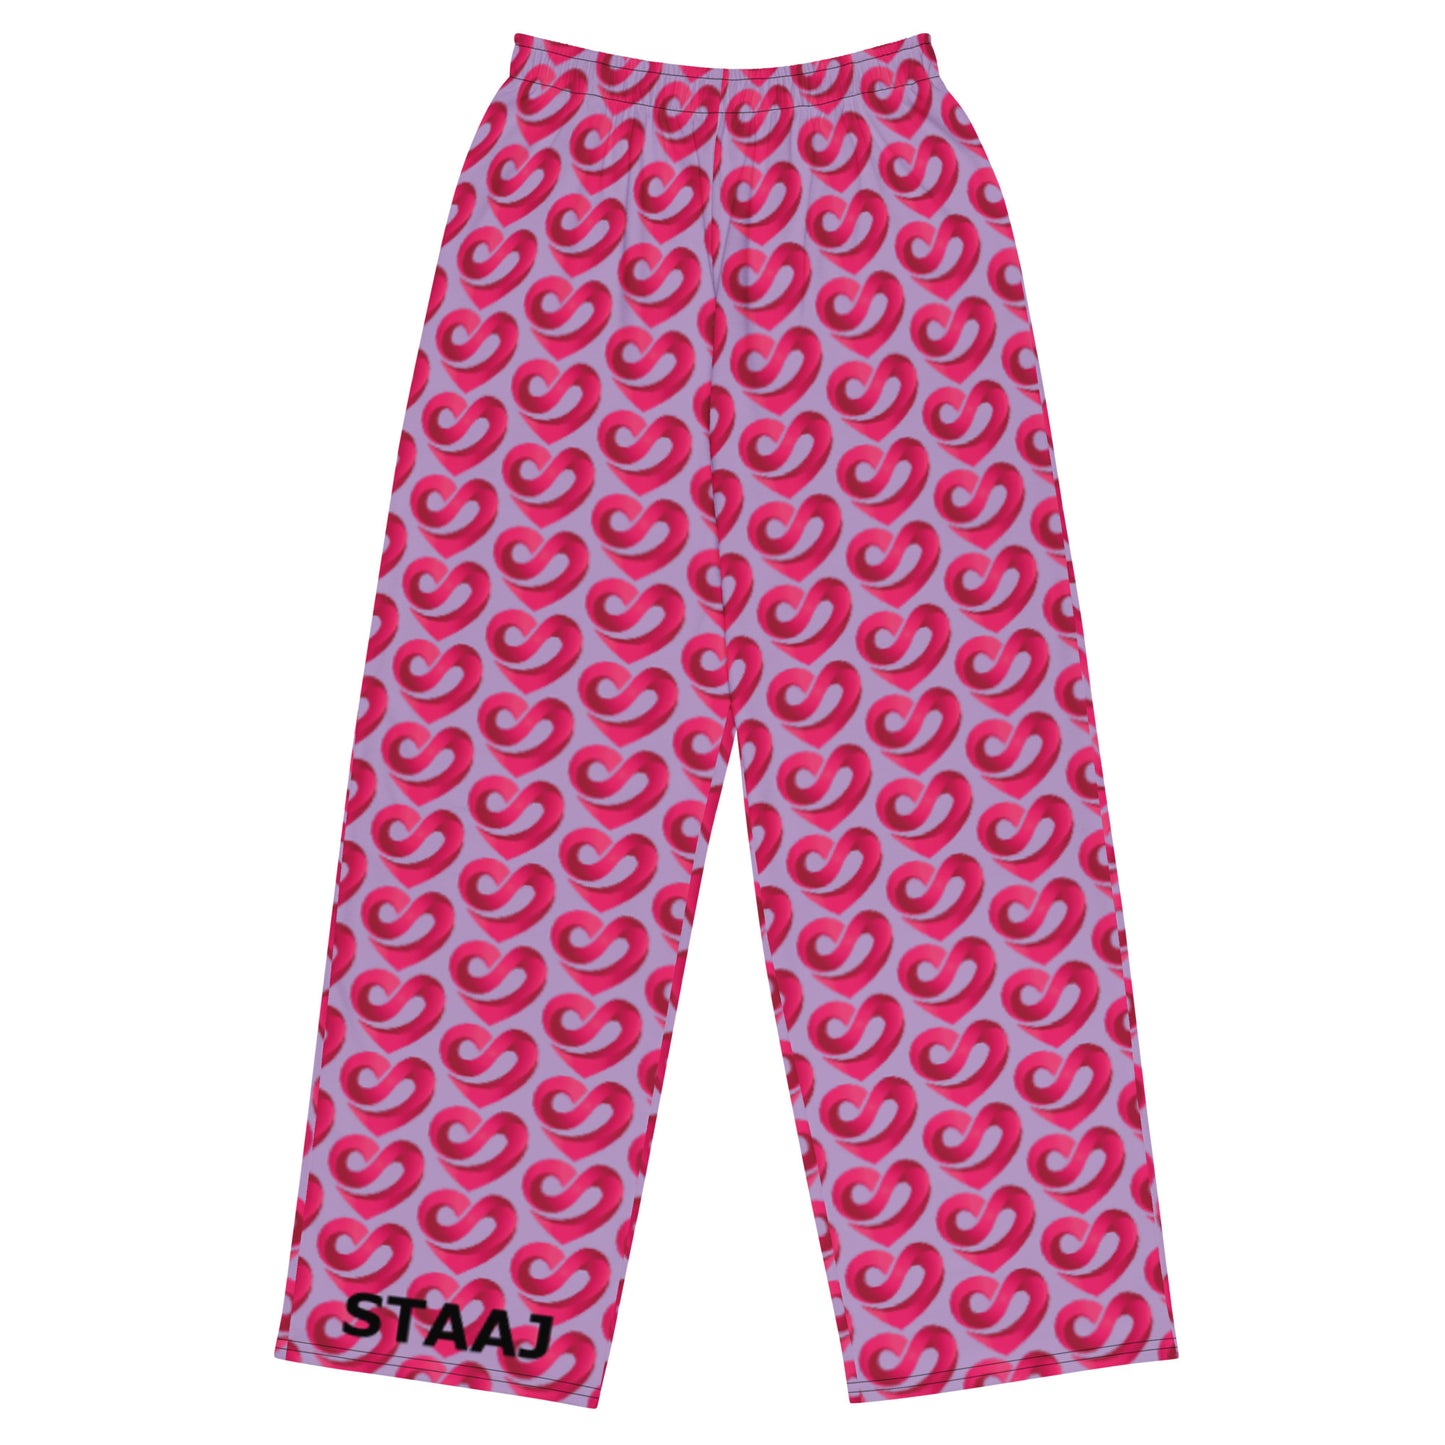 STAAJ Heart-S All-Over Print Unisex Lilac Wide-Leg Pants